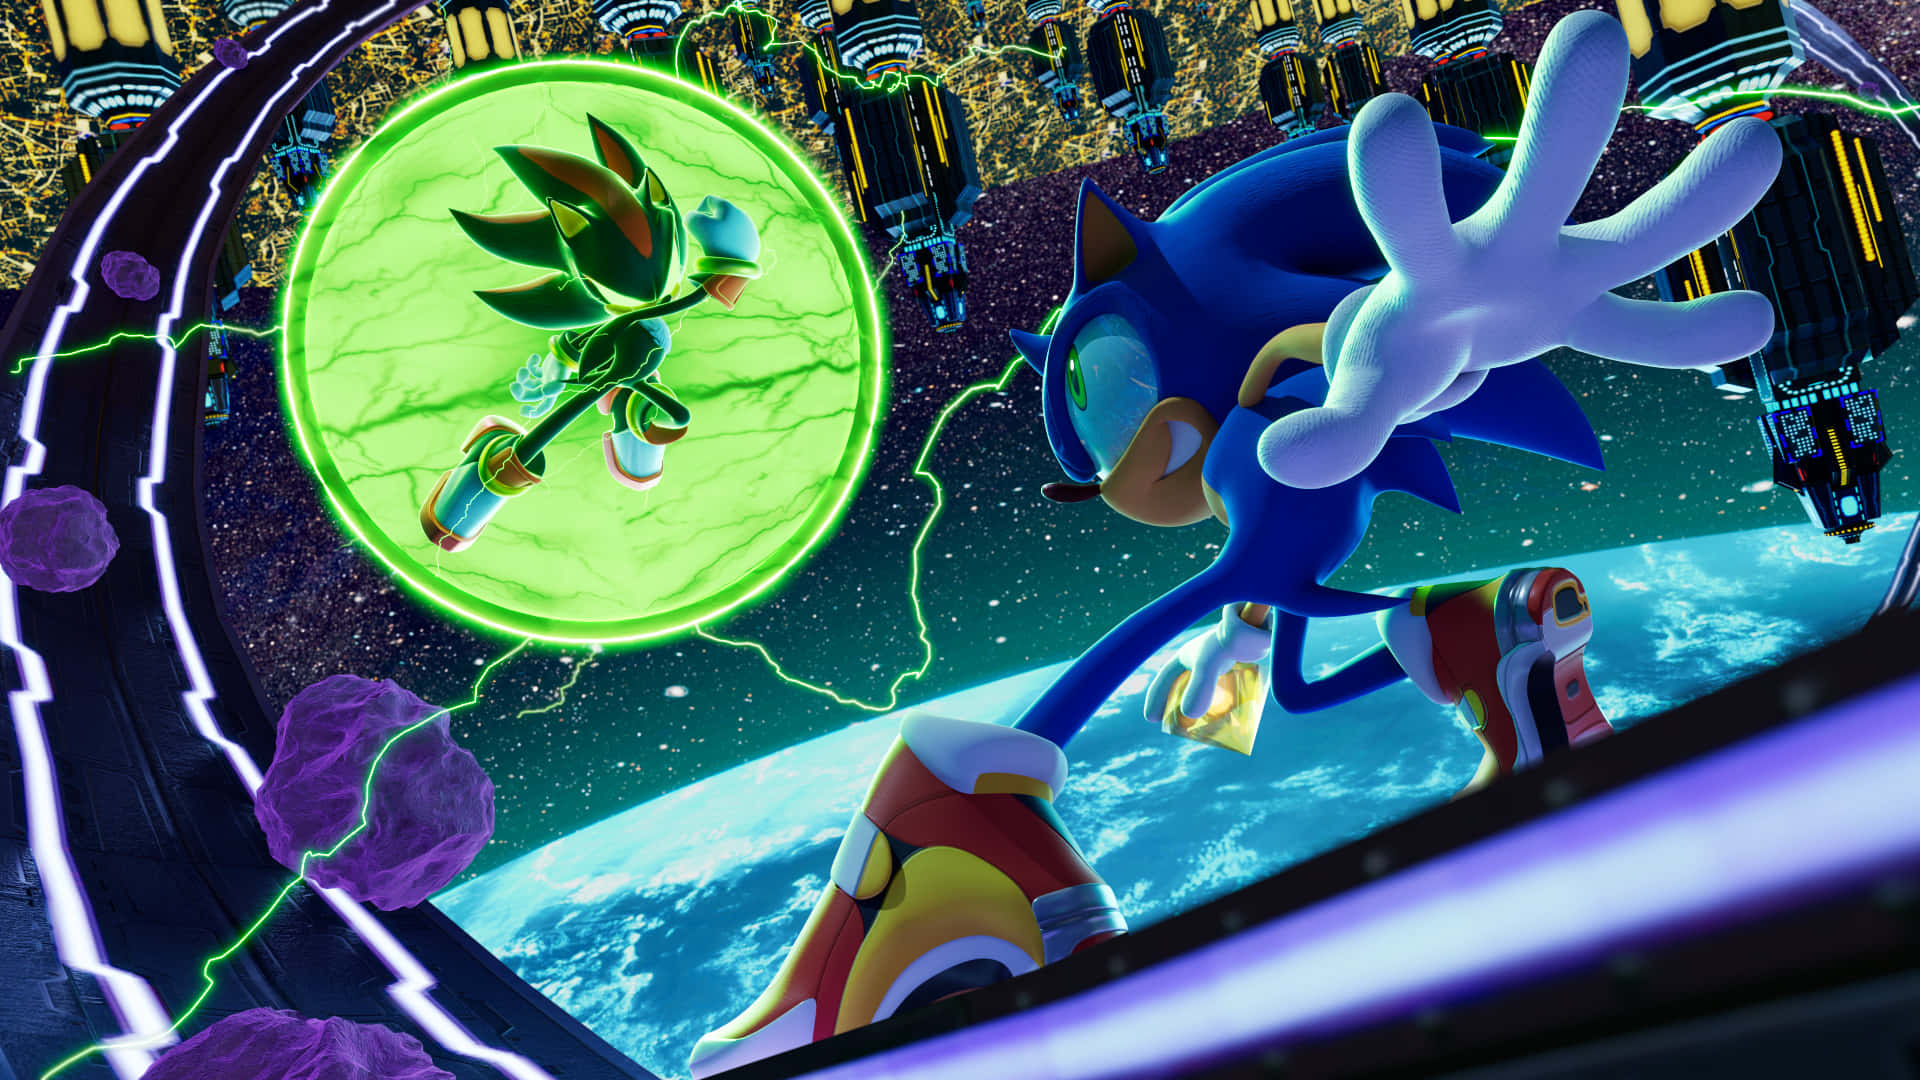 Caption: Sonic Adventure HD - High-speed action with Sonic the Hedgehog Wallpaper